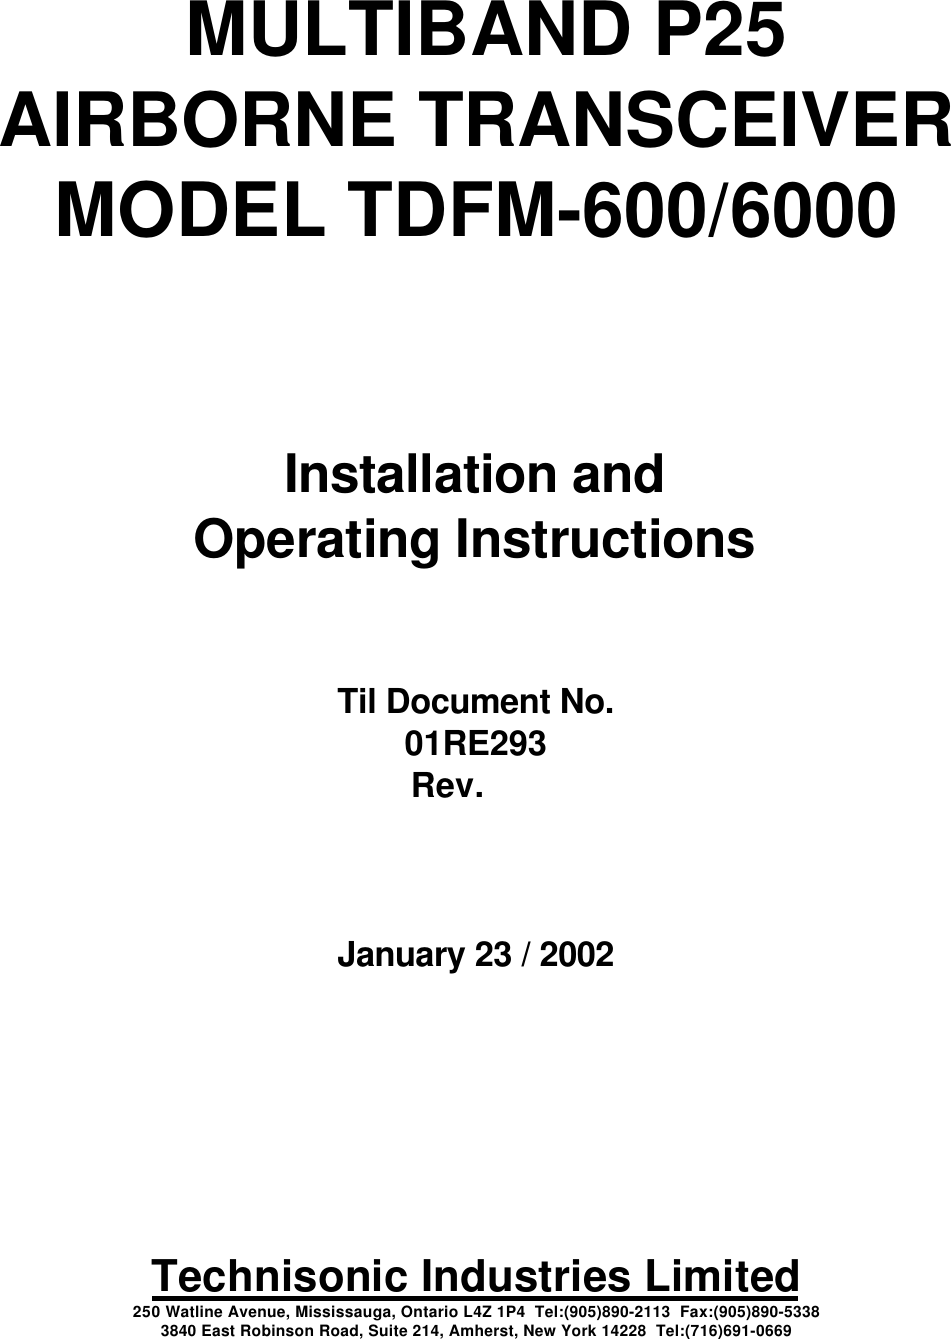  MULTIBAND P25AIRBORNE TRANSCEIVERMODEL TDFM-600/6000Installation andOperating InstructionsTil Document No.01RE293Rev.      January 23 / 2002Technisonic Industries Limited250 Watline Avenue, Mississauga, Ontario L4Z 1P4  Tel:(905)890-2113  Fax:(905)890-53383840 East Robinson Road, Suite 214, Amherst, New York 14228  Tel:(716)691-0669